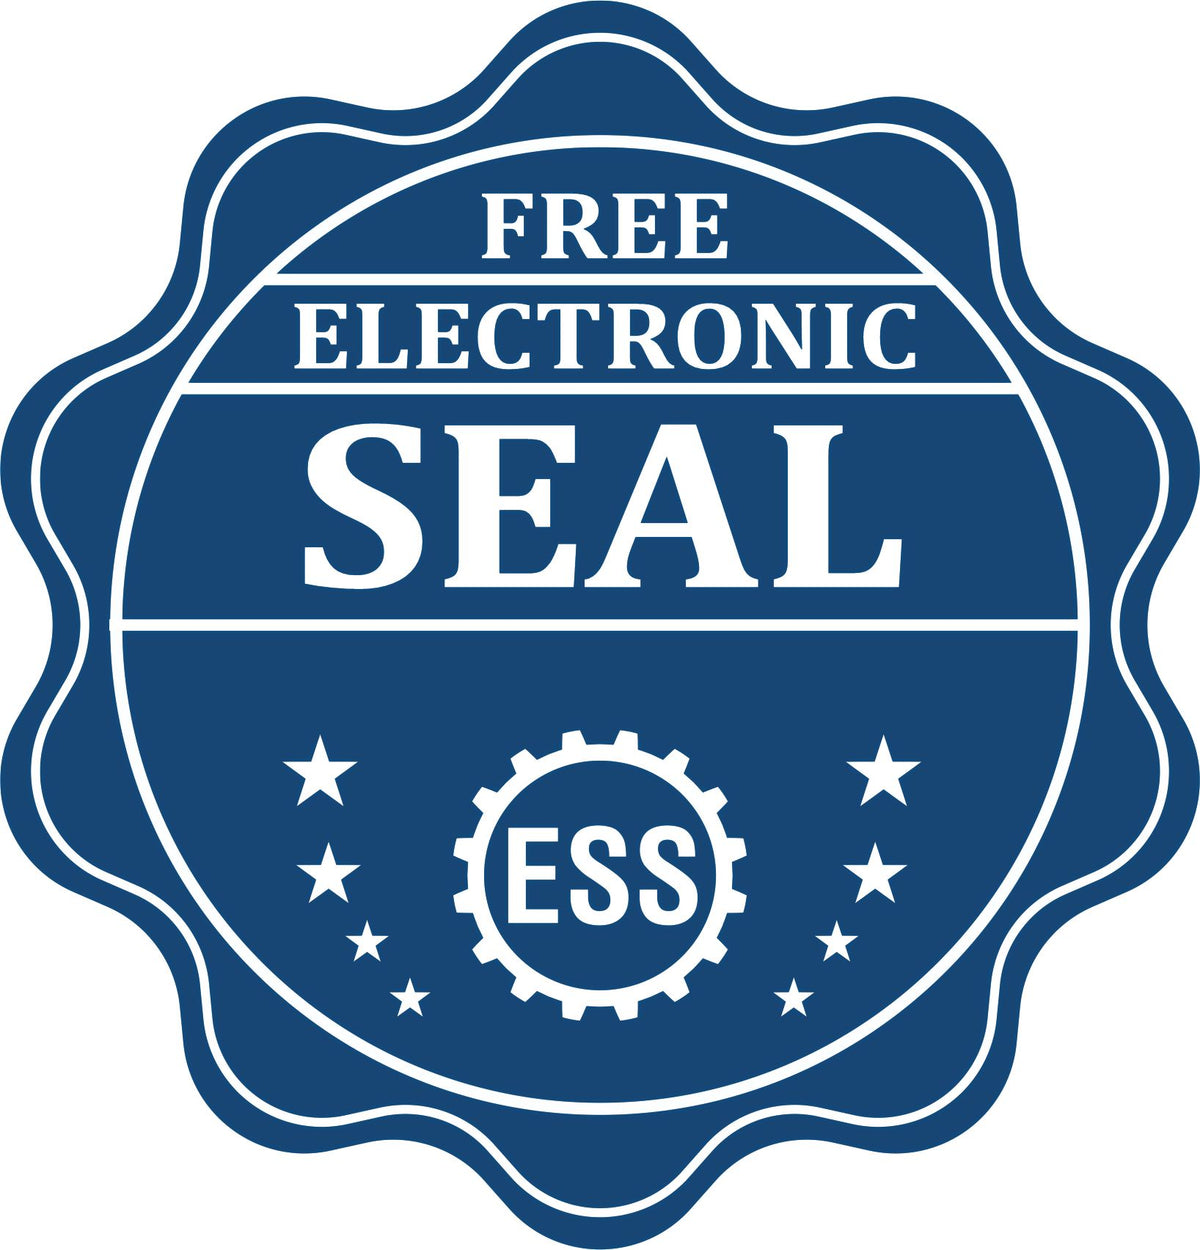 A badge showing a free electronic seal for the Slim Pre-Inked Kentucky Professional Engineer Seal Stamp with stars and the ESS gear on the emblem.